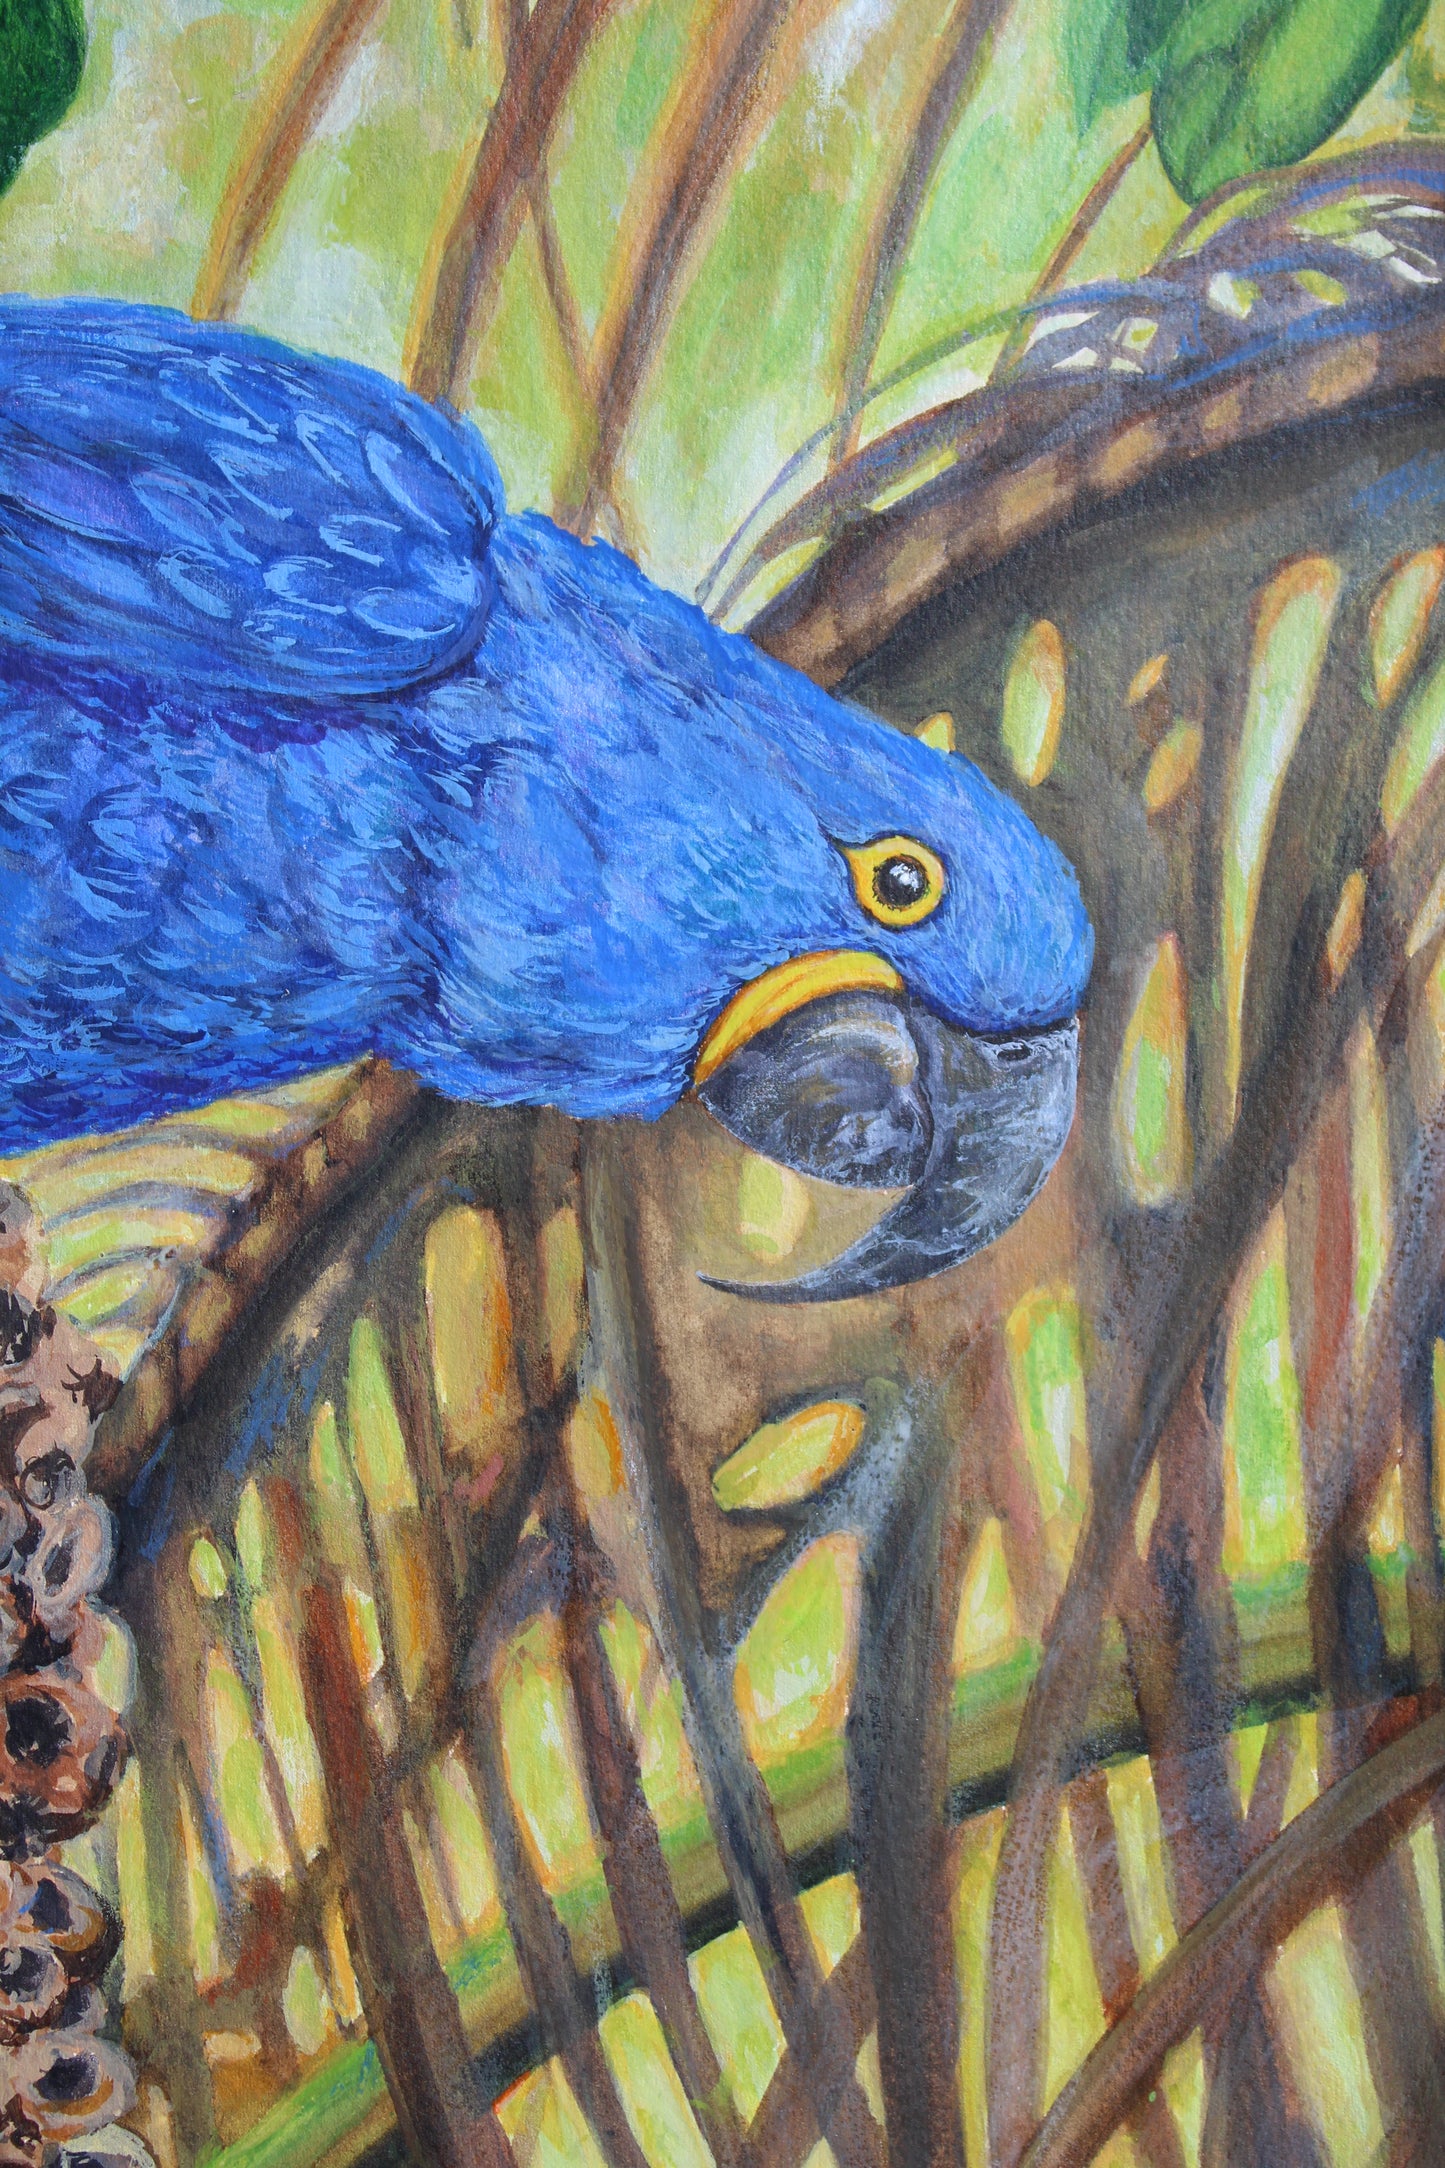 Hyacinth Macaws In The Rainforest, Original 30" x 22" Watercolor Parrot Bird Painting